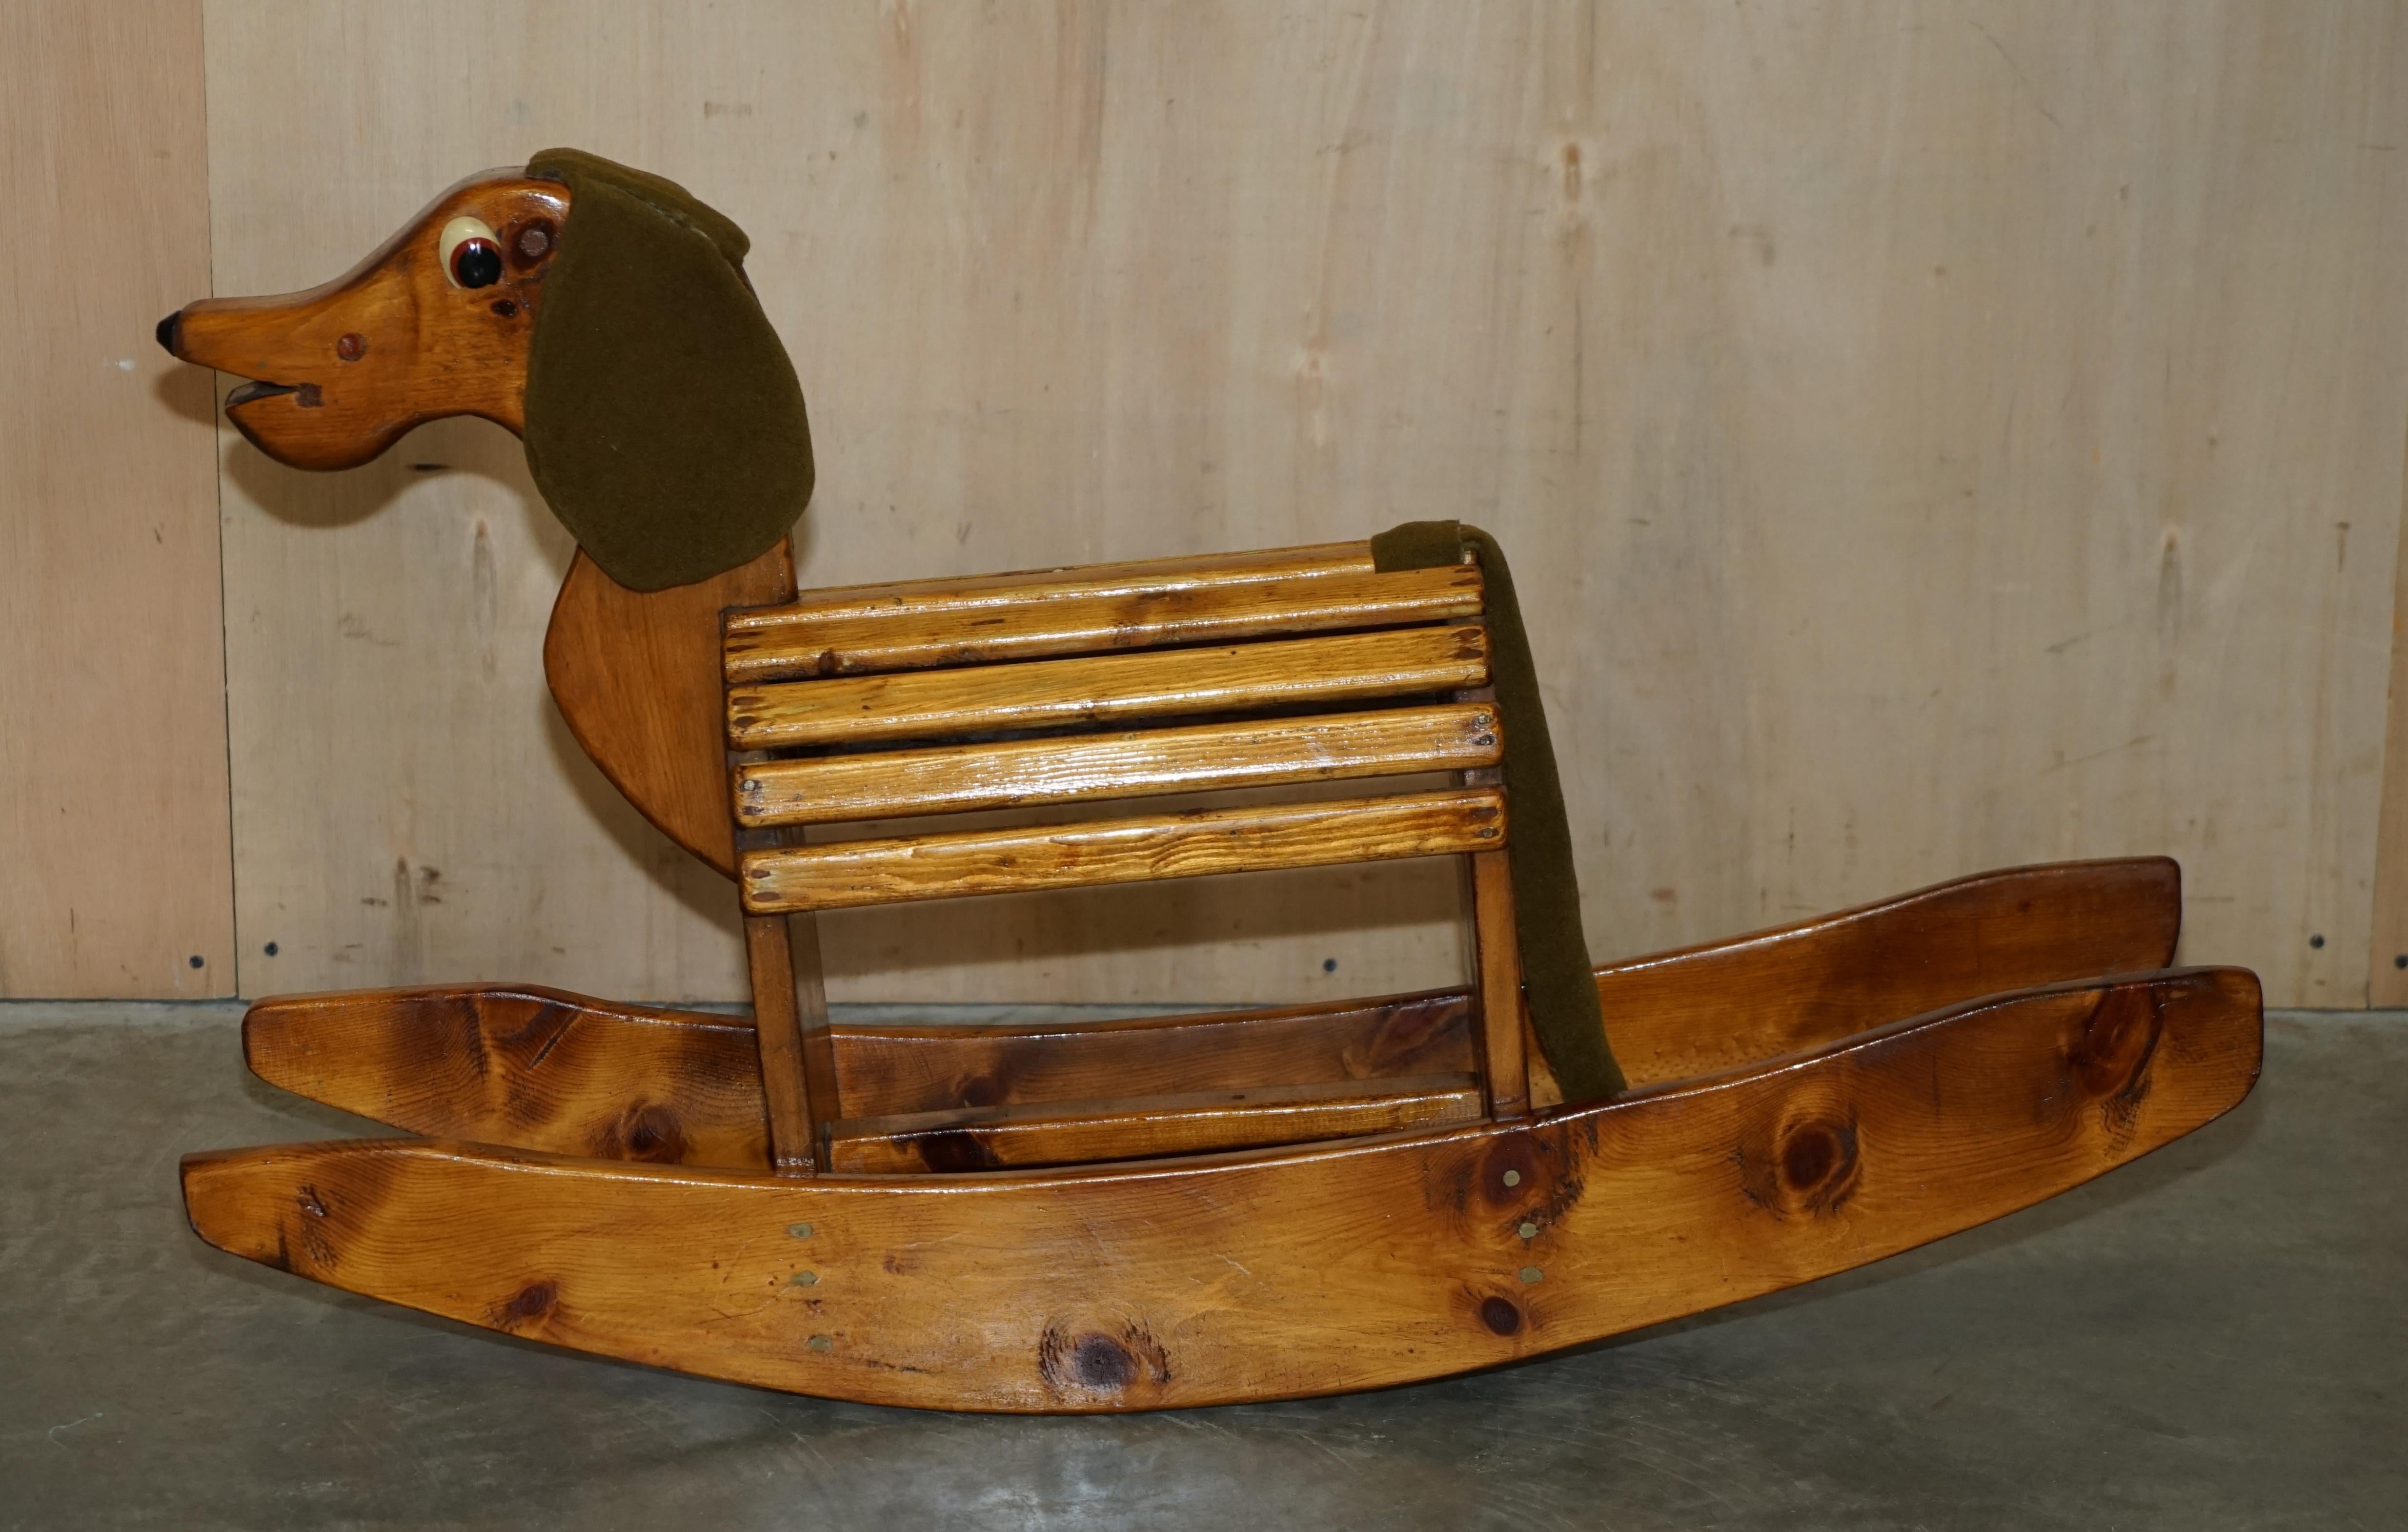 We are delighted to offer for sale this one of a kind hand made in England rocking horse in the form of a Sausage dog.

What a charming period piece of children’s folk art. I have never seen another rocking horse sausage dog before, it just